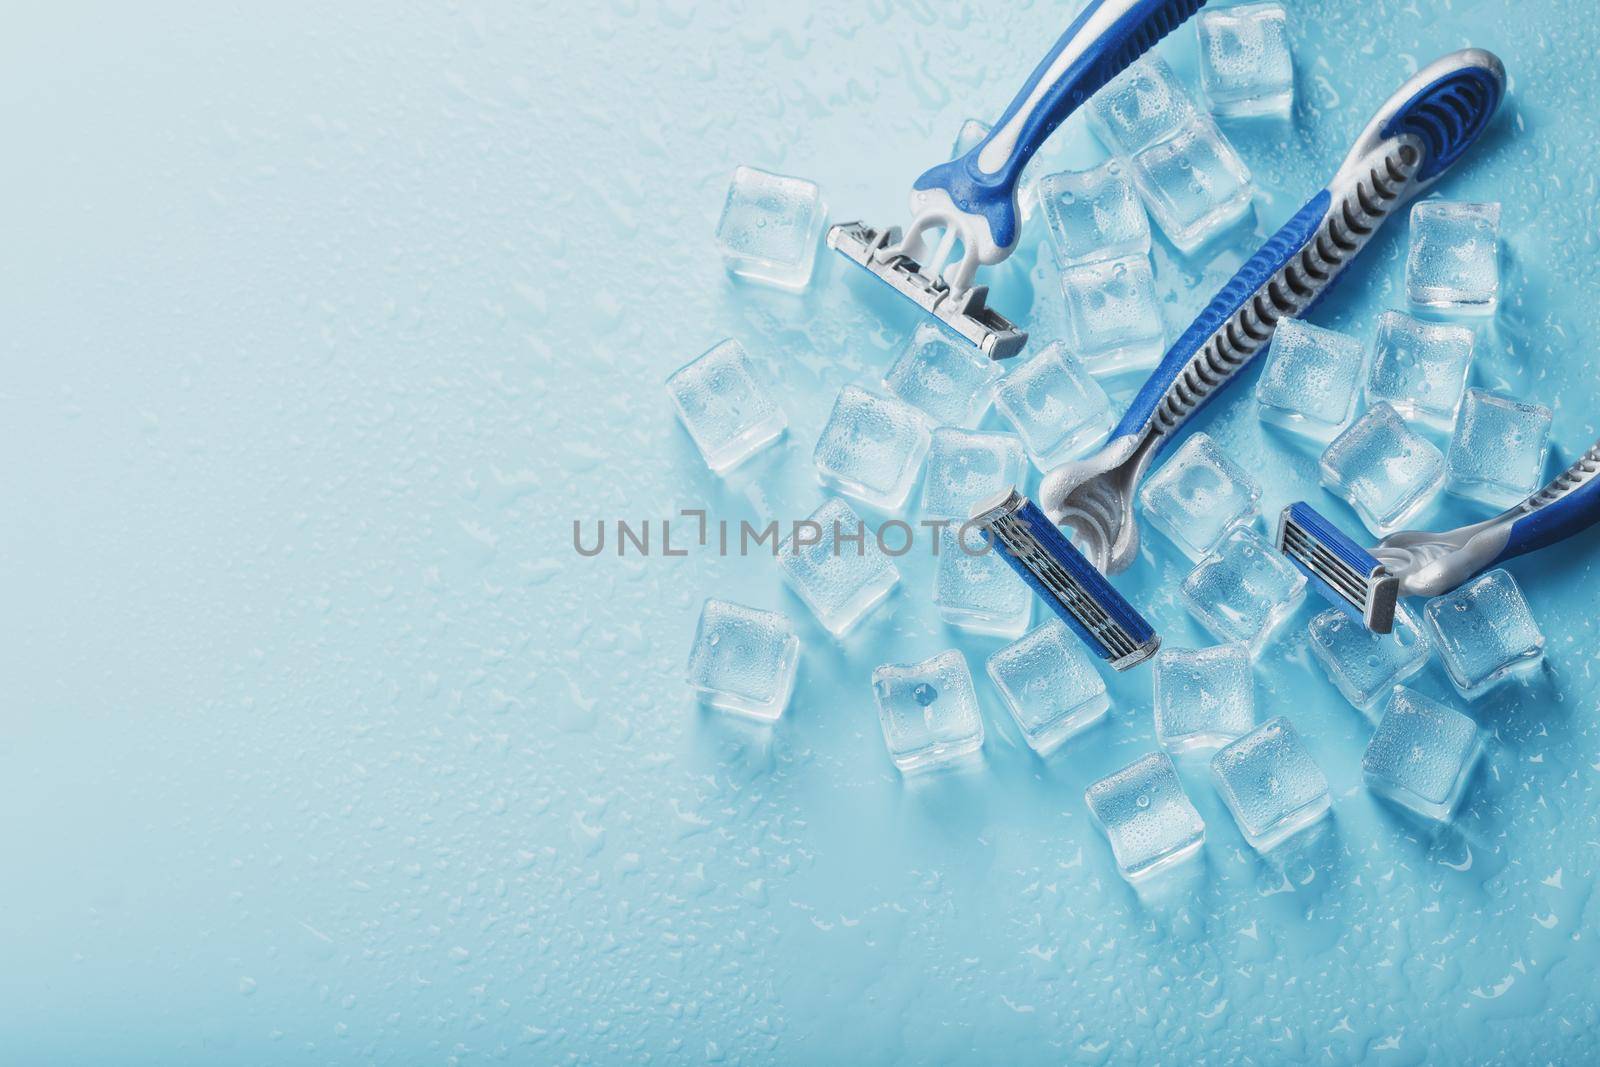 Three shaving machines on a frosty blue background with ice. The concept of cleanliness and frosty freshness by AlexGrec